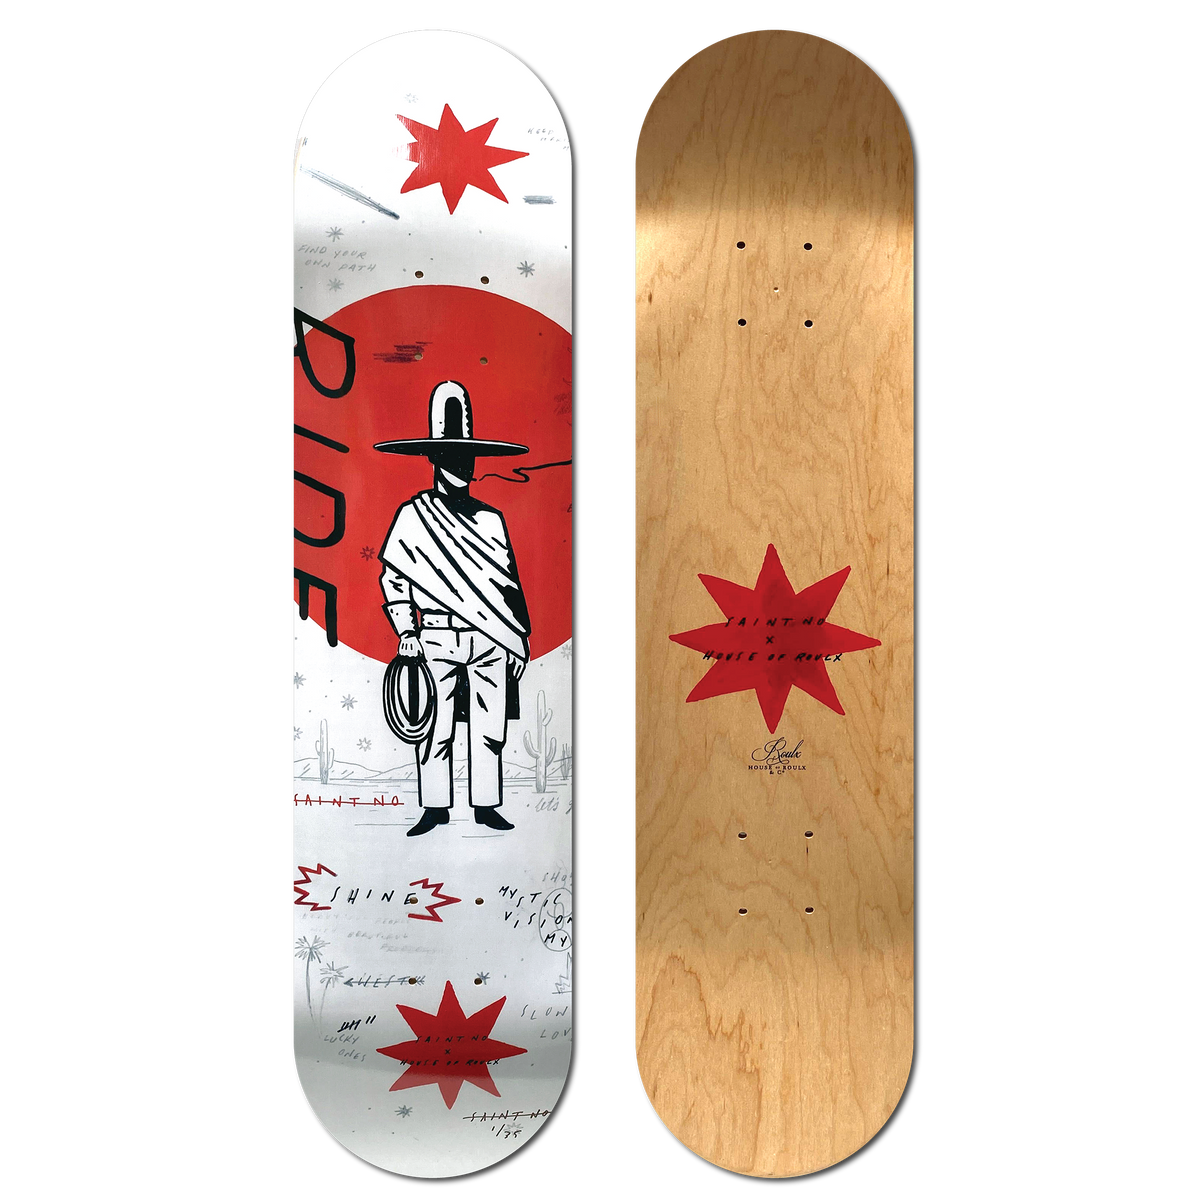 SAINT NO &quot;Cosmic Rider: Side B&quot; - Skate Deck, Limited Edition of 35